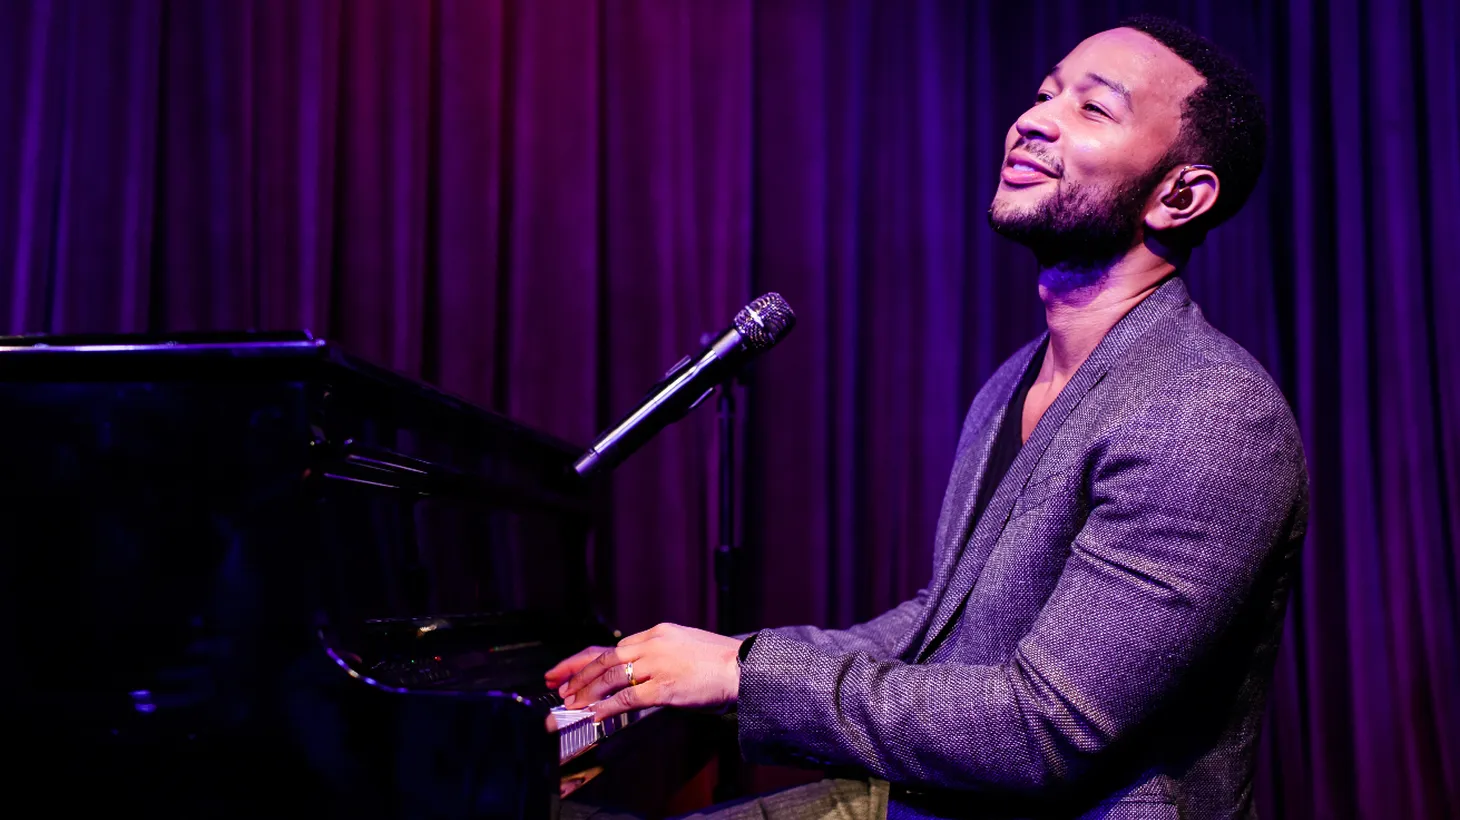 Grammy Award-winning singer John Legend joined us for an intimate performance of love songs and more at KCRW's Apogee Sessions.